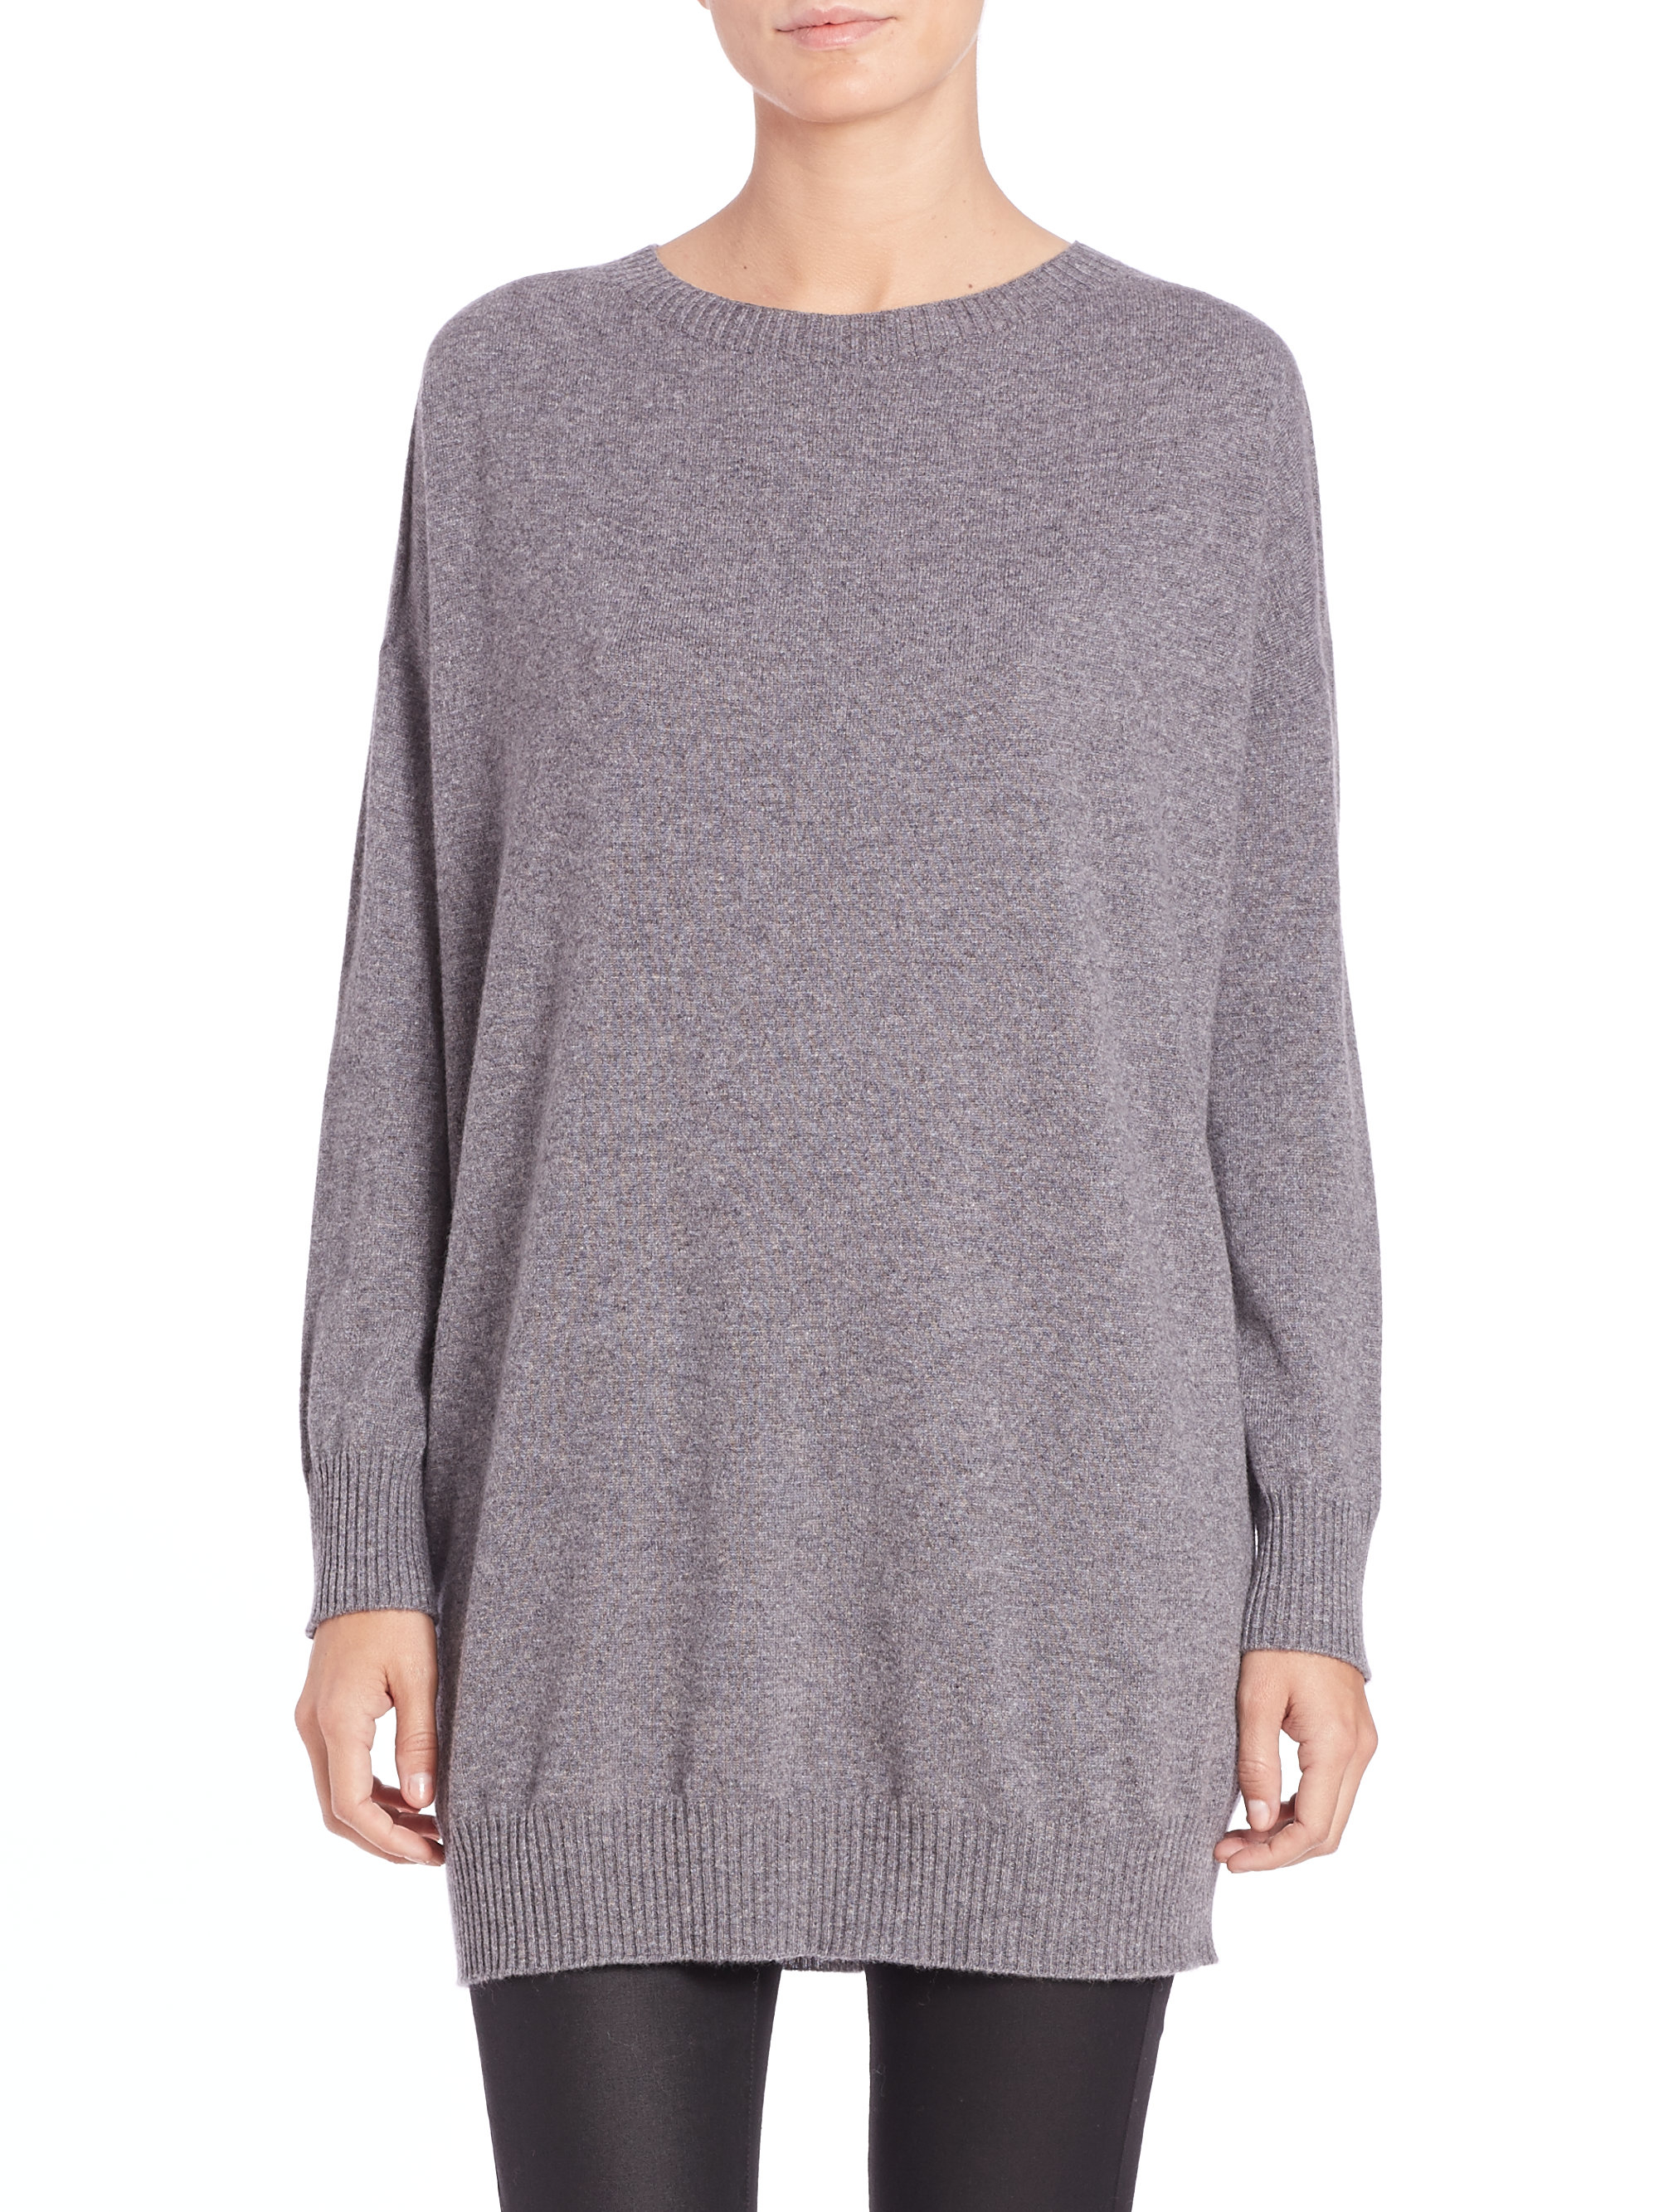 Lyst - Eileen Fisher Icon Cashmere Tunic Sweater in Gray